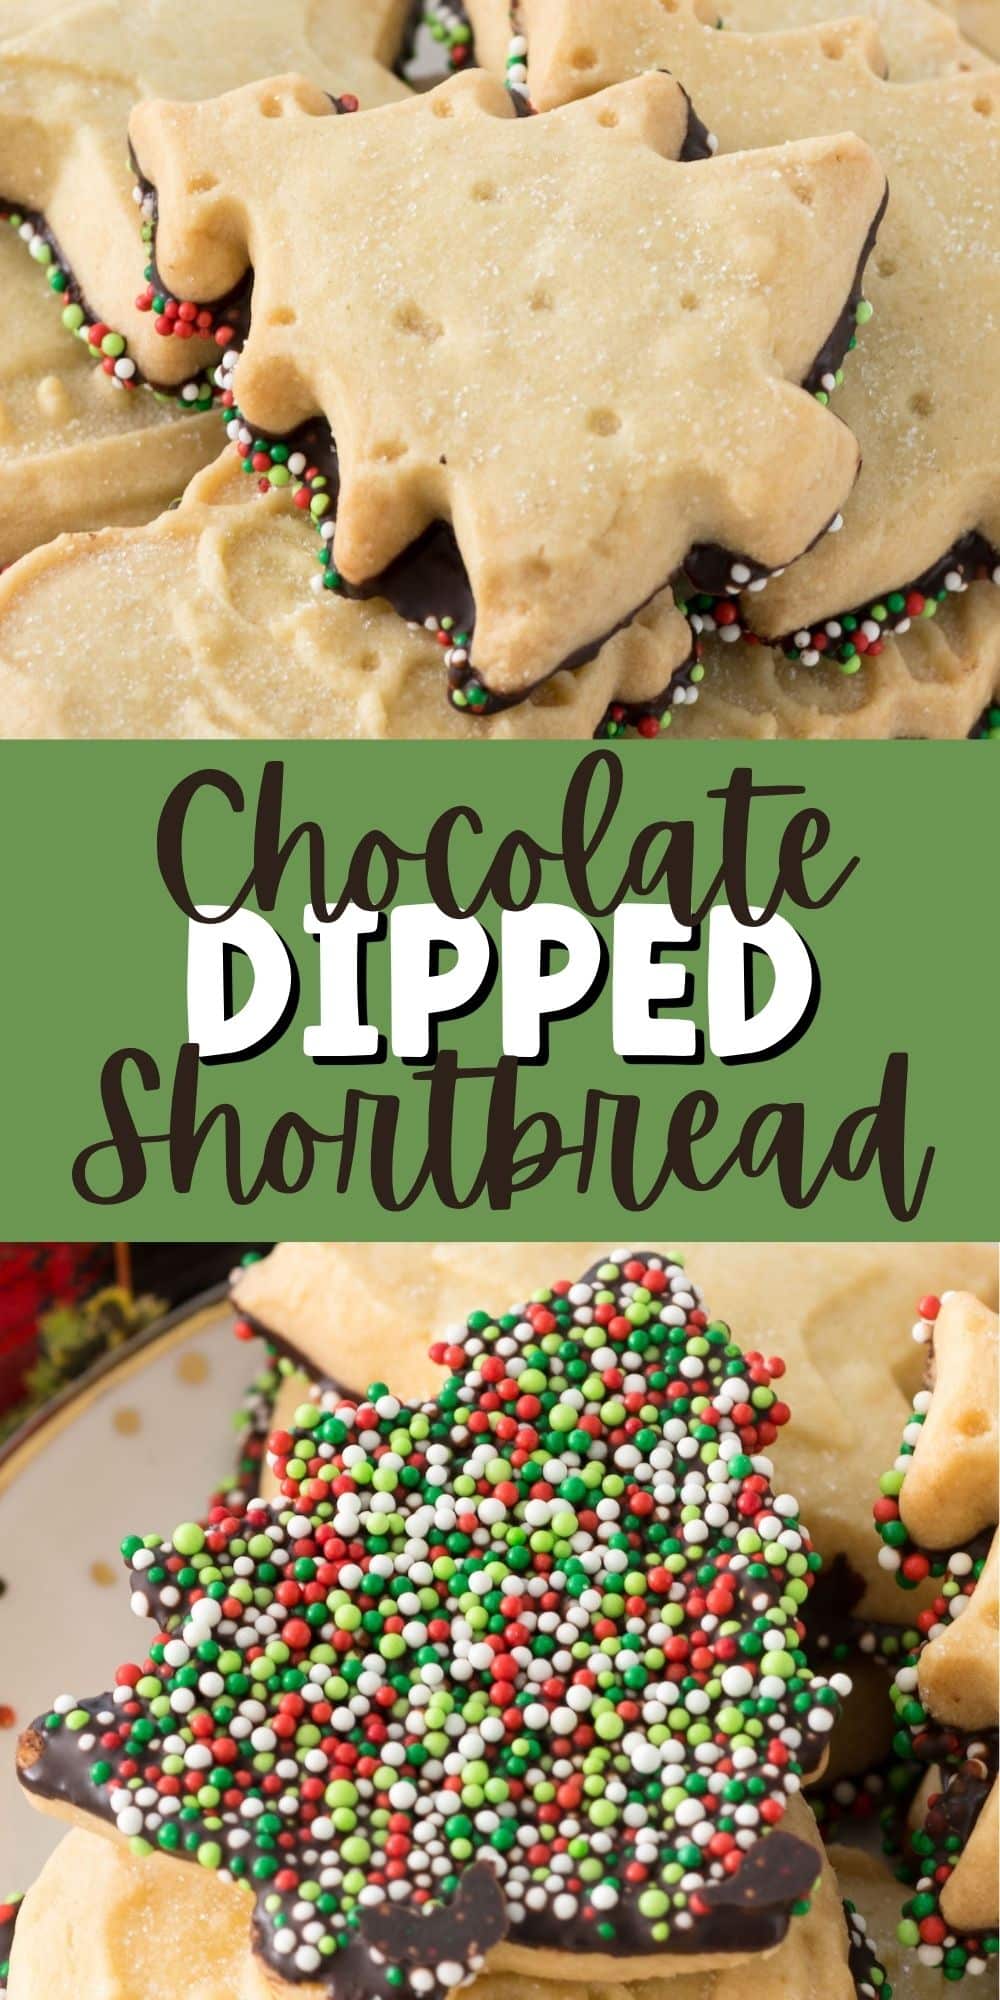 two photos of shortbread cookie dipped in chocolate and covered in christmas sprinkles with words in the middle